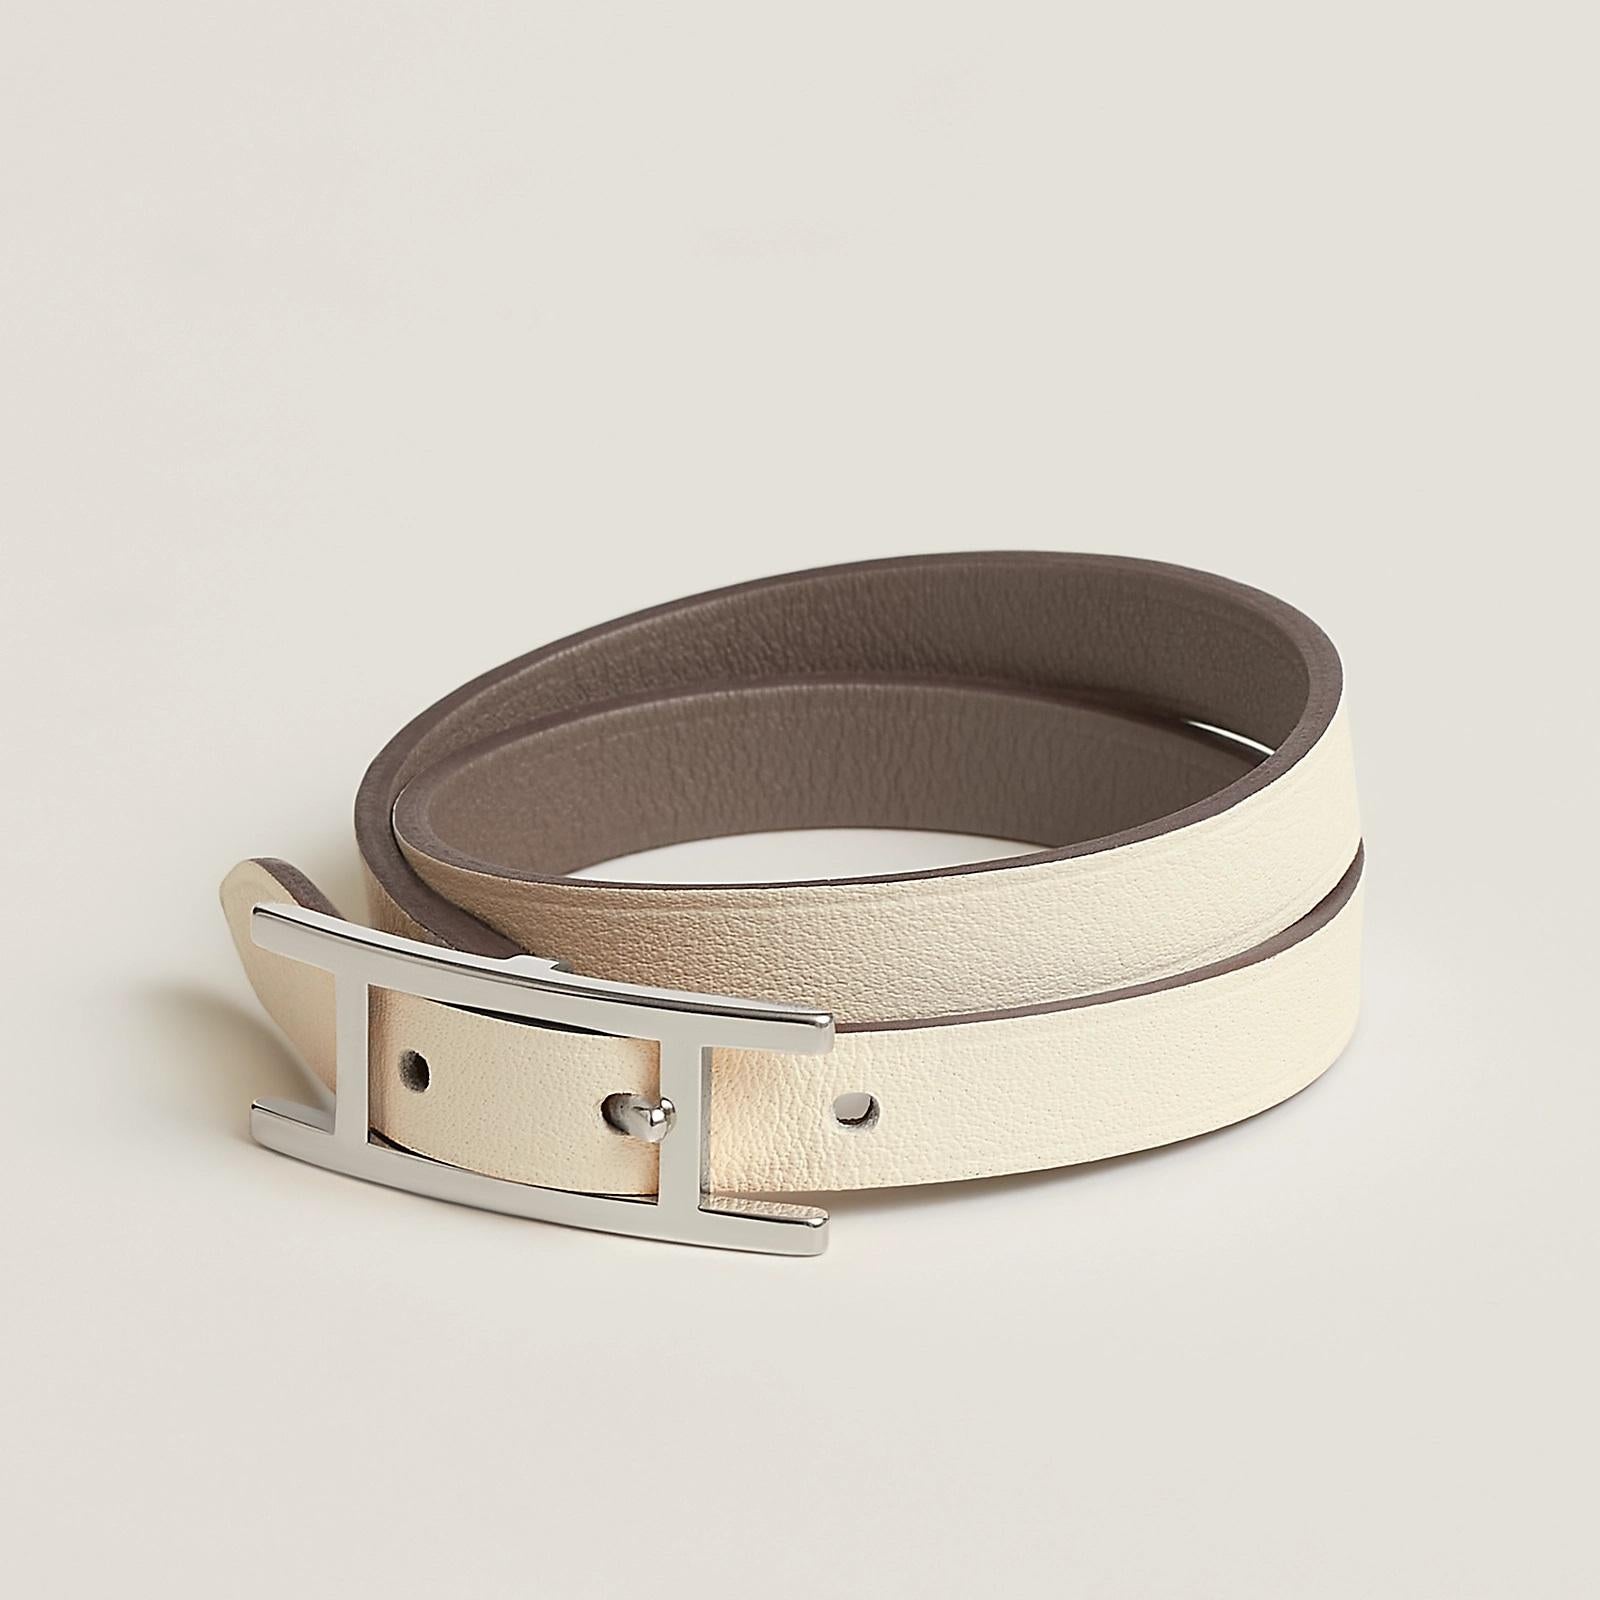 Color Oakum / Natural Size T2 15.5cm
Reversible double wrap bracelet in Swift calfskin, adorned with the iconic Hapi buckle. Palladium finish.
14.5cm to 15.5cm wrist circumference  Leather width: 0.7 cm